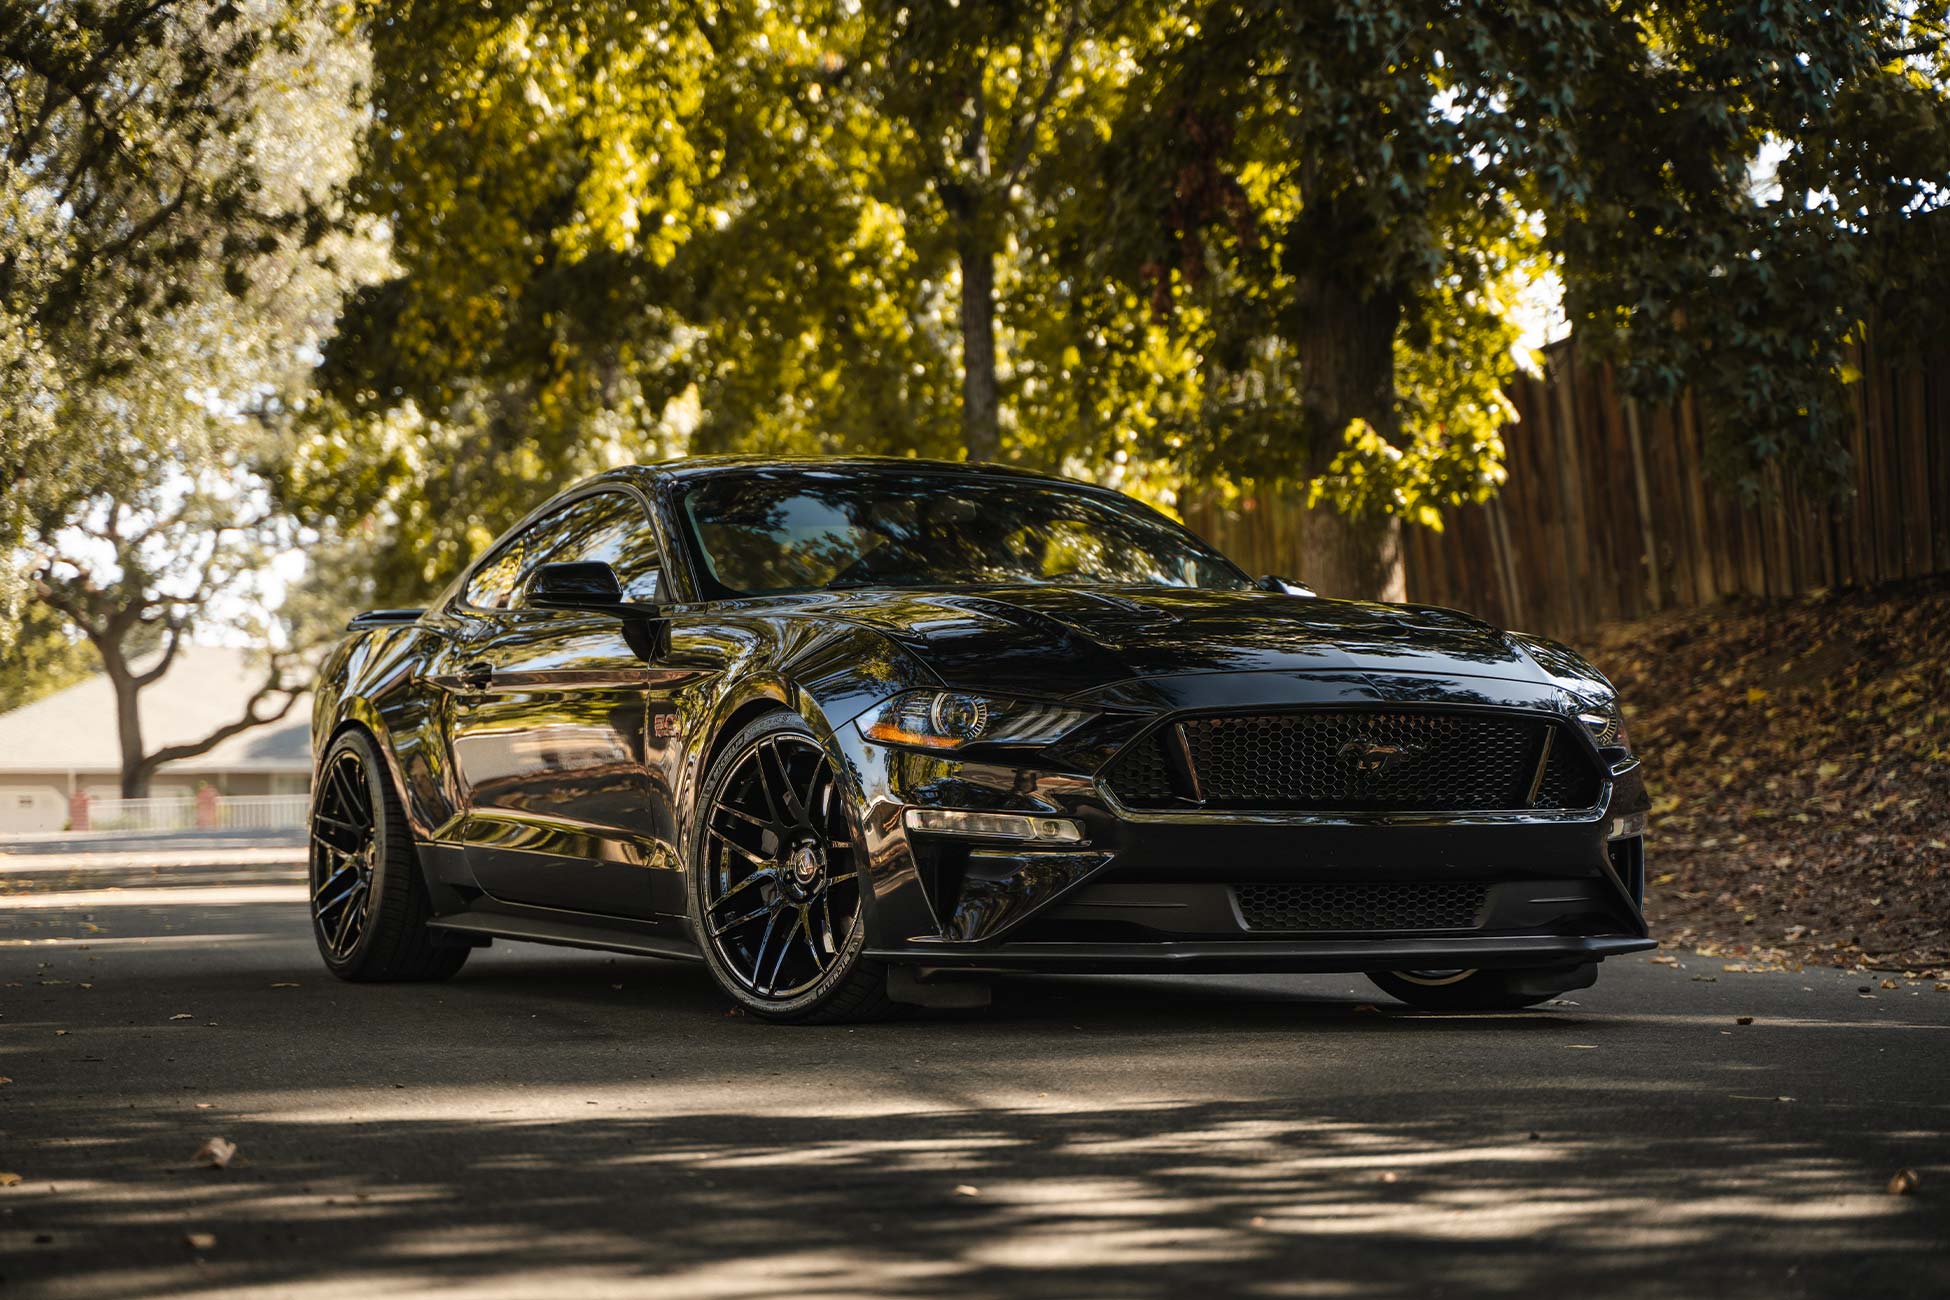 An image of a black Ford Mustang 5.0 with staggered 20 inch Curva Concepts wheels